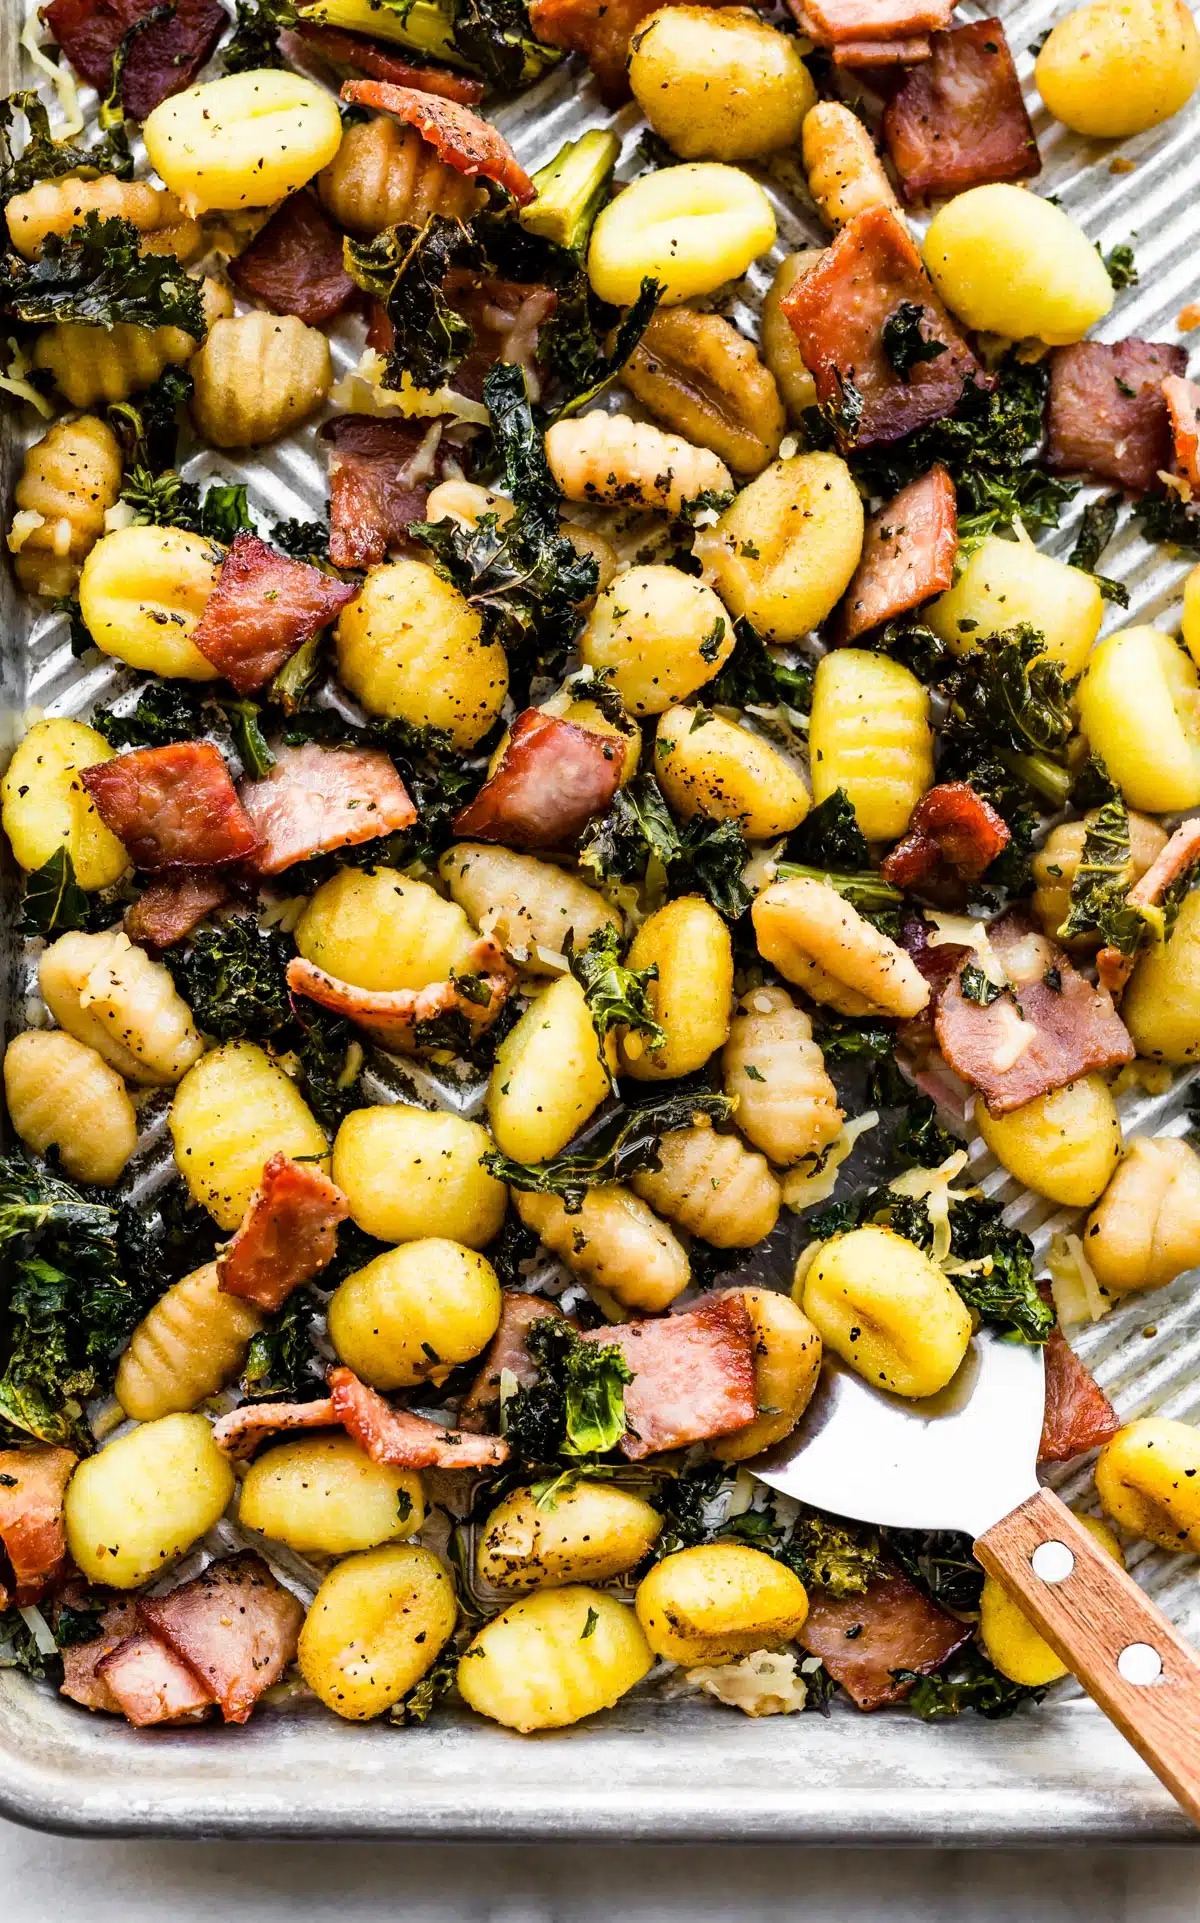 Roasted gluten-free potatoes with bacon and kale on a baking sheet.